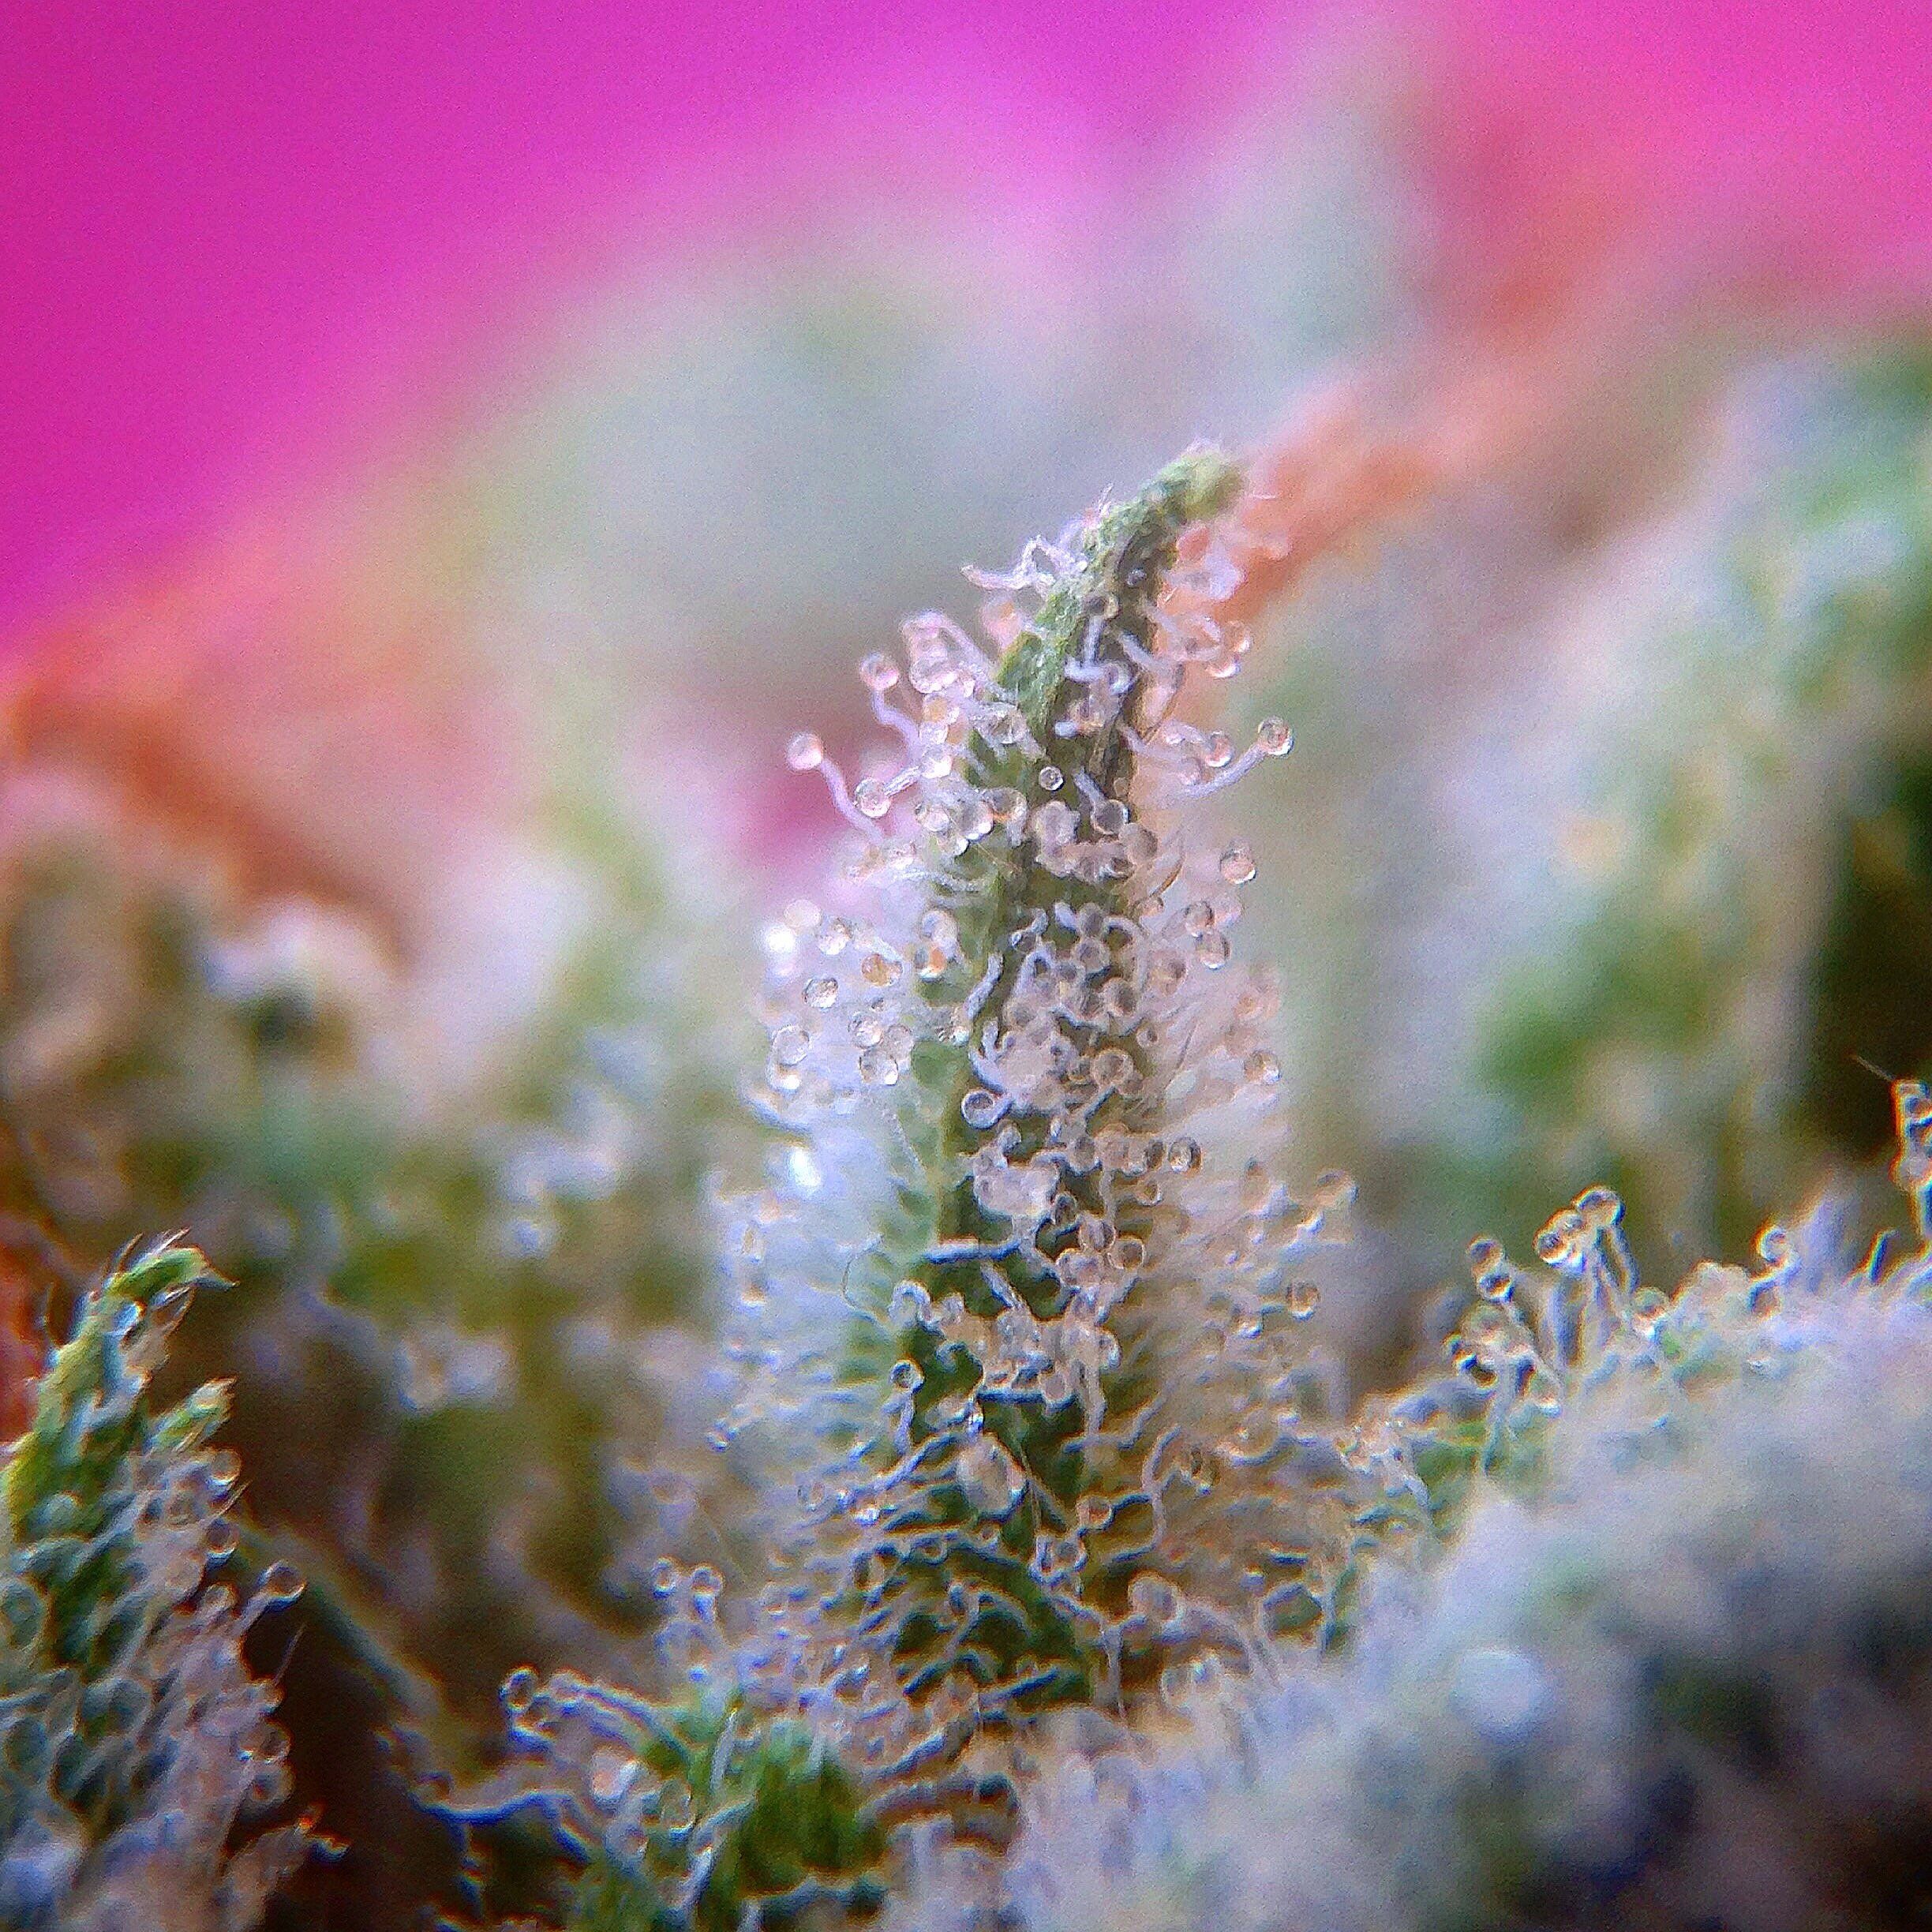 august 2020 photo contest results - nature sweetest dank Strawberry Lemonade by CannaBiotix